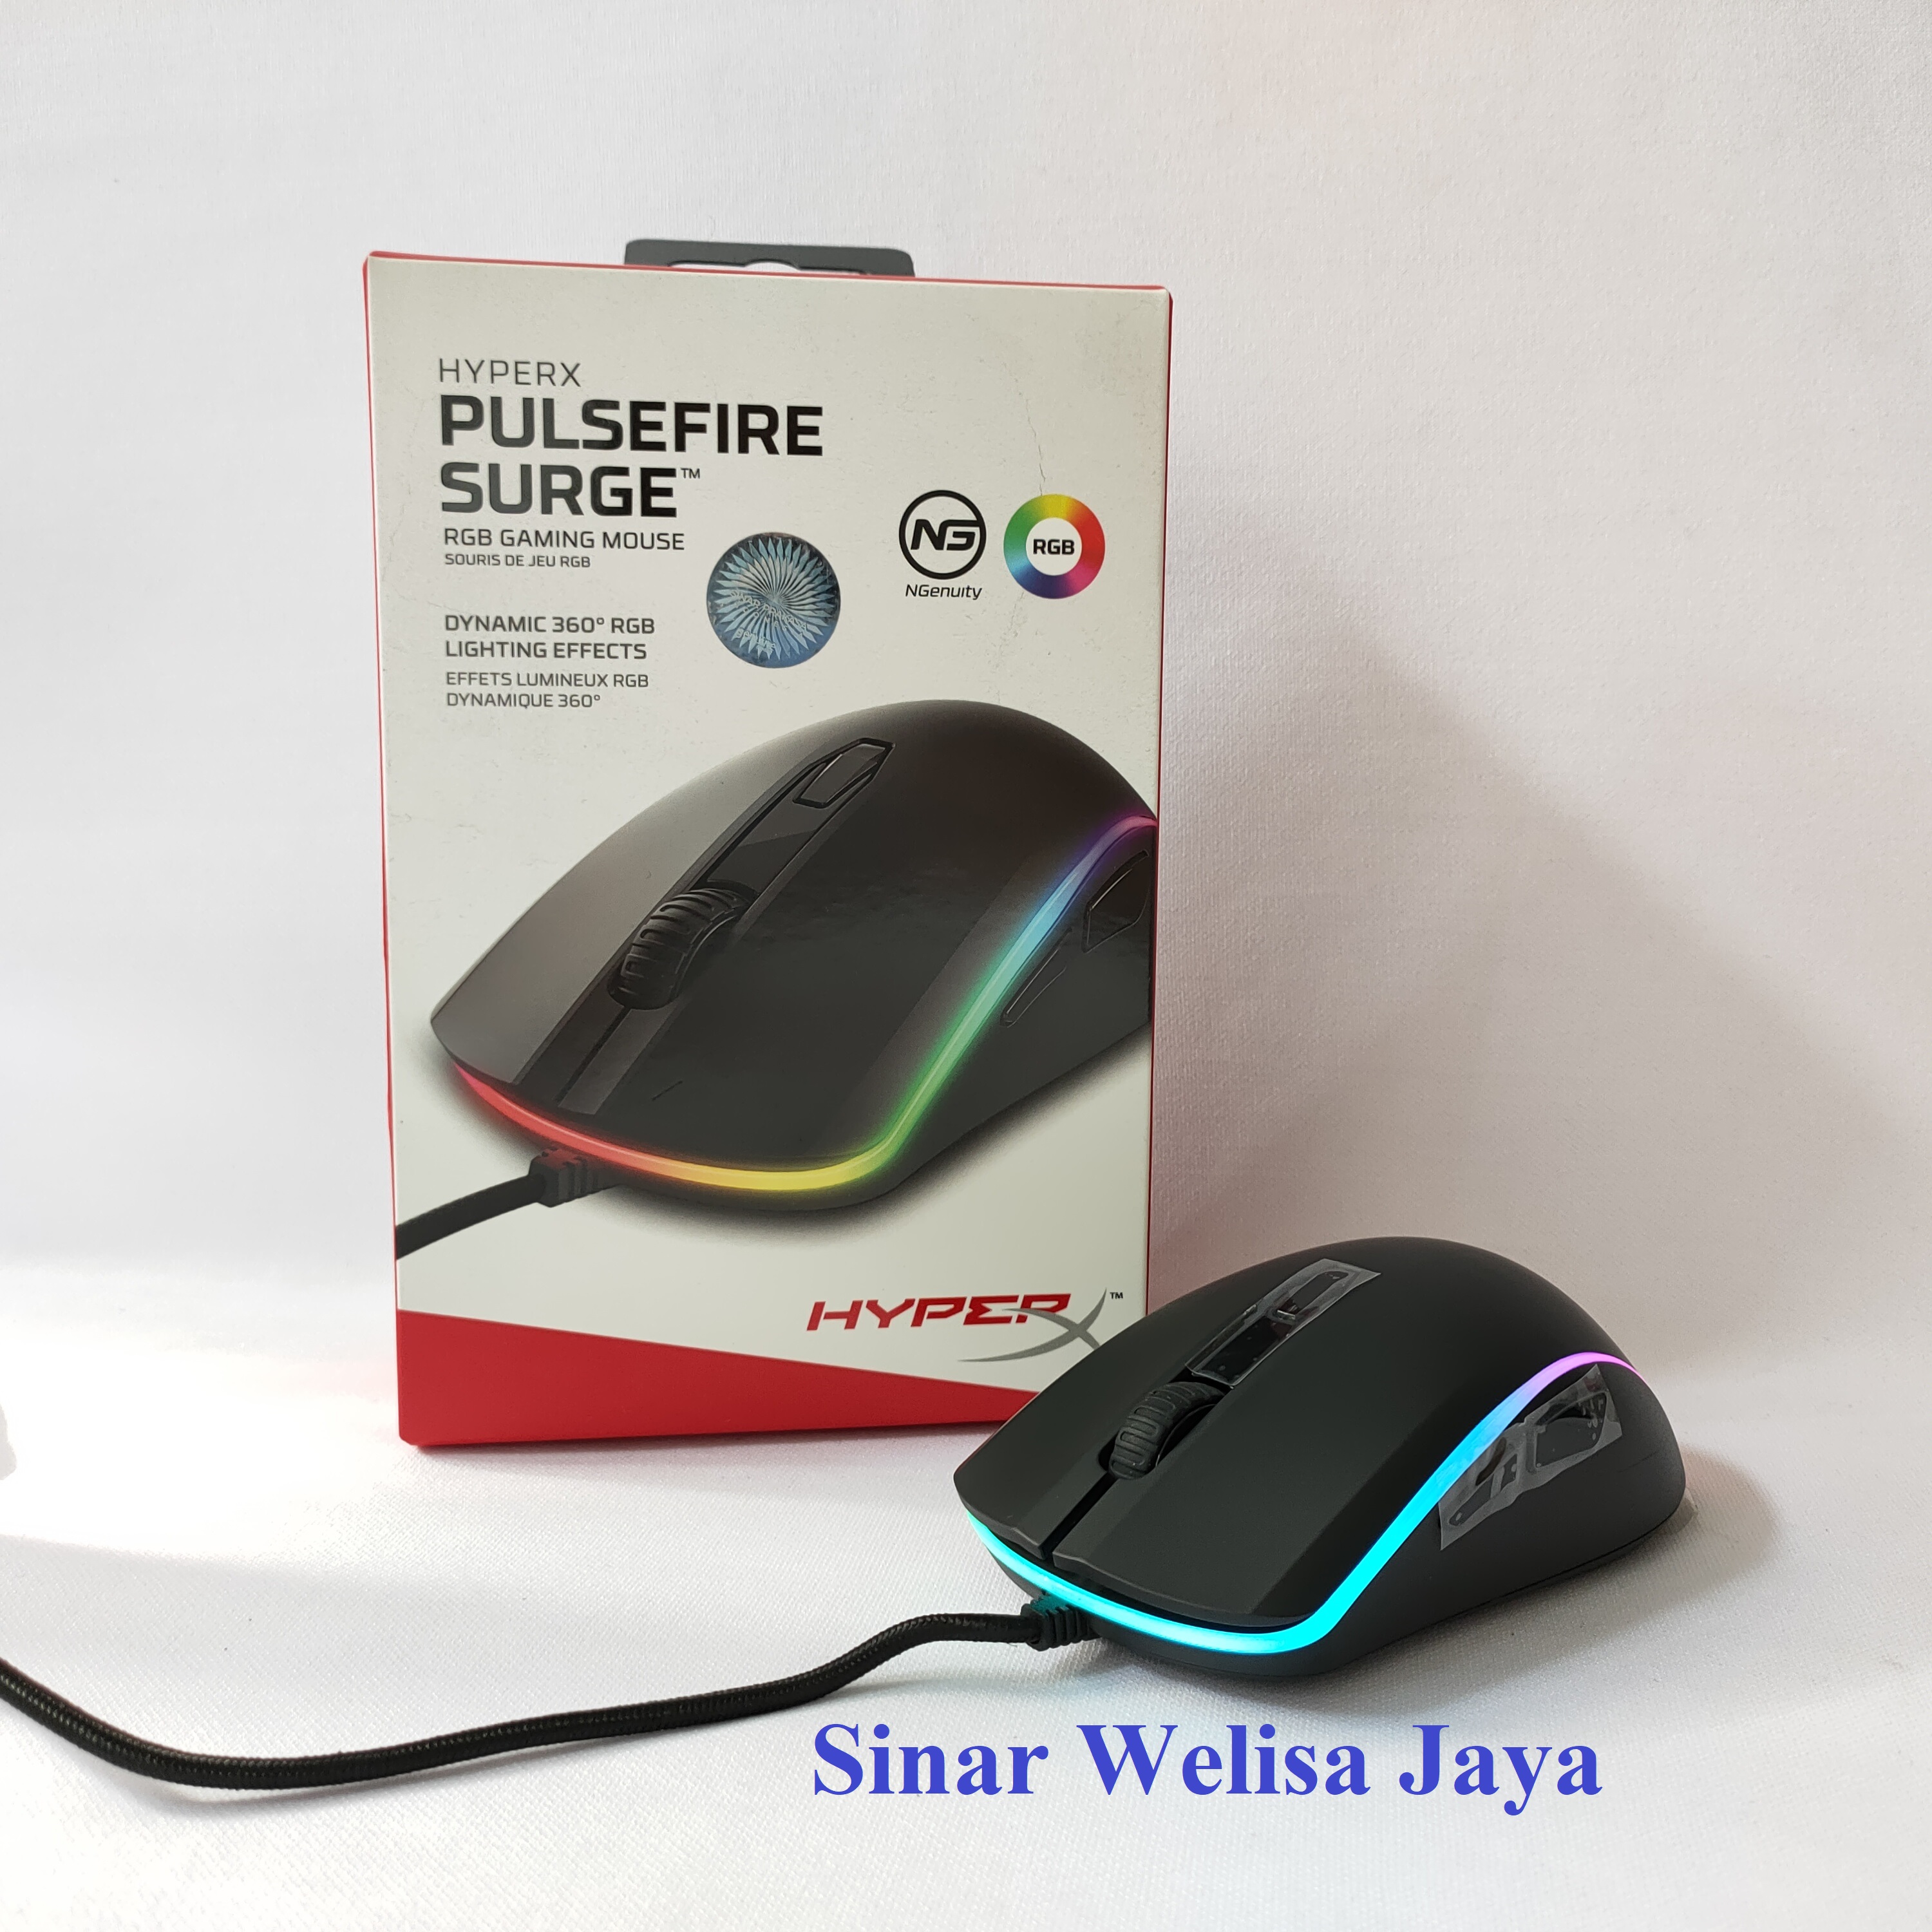 Hyperx Pulsefire Surge Gaming Mouse | Lazada Indonesia